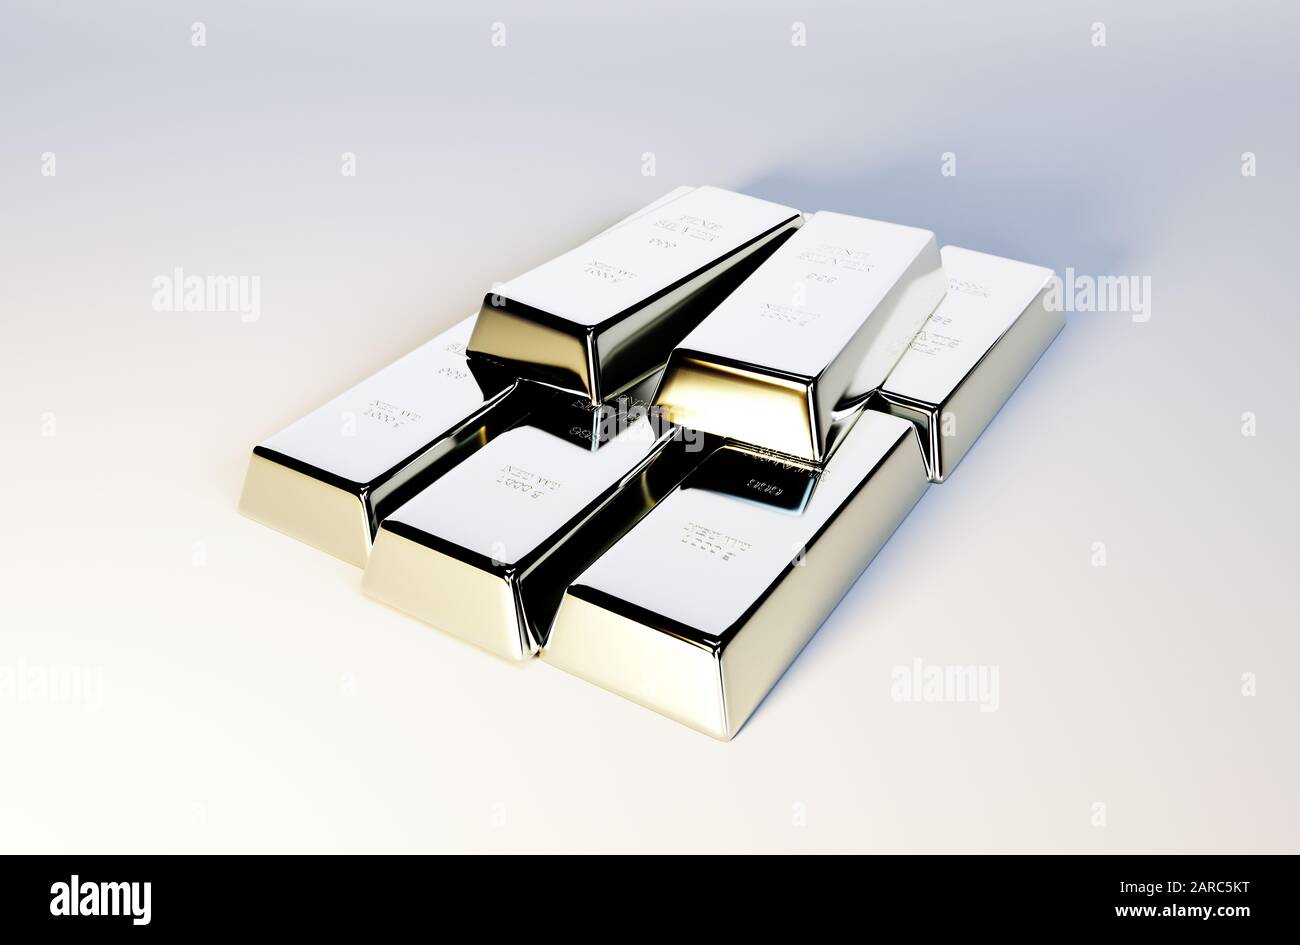 3d photo realistic image of silver bars Stock Photo